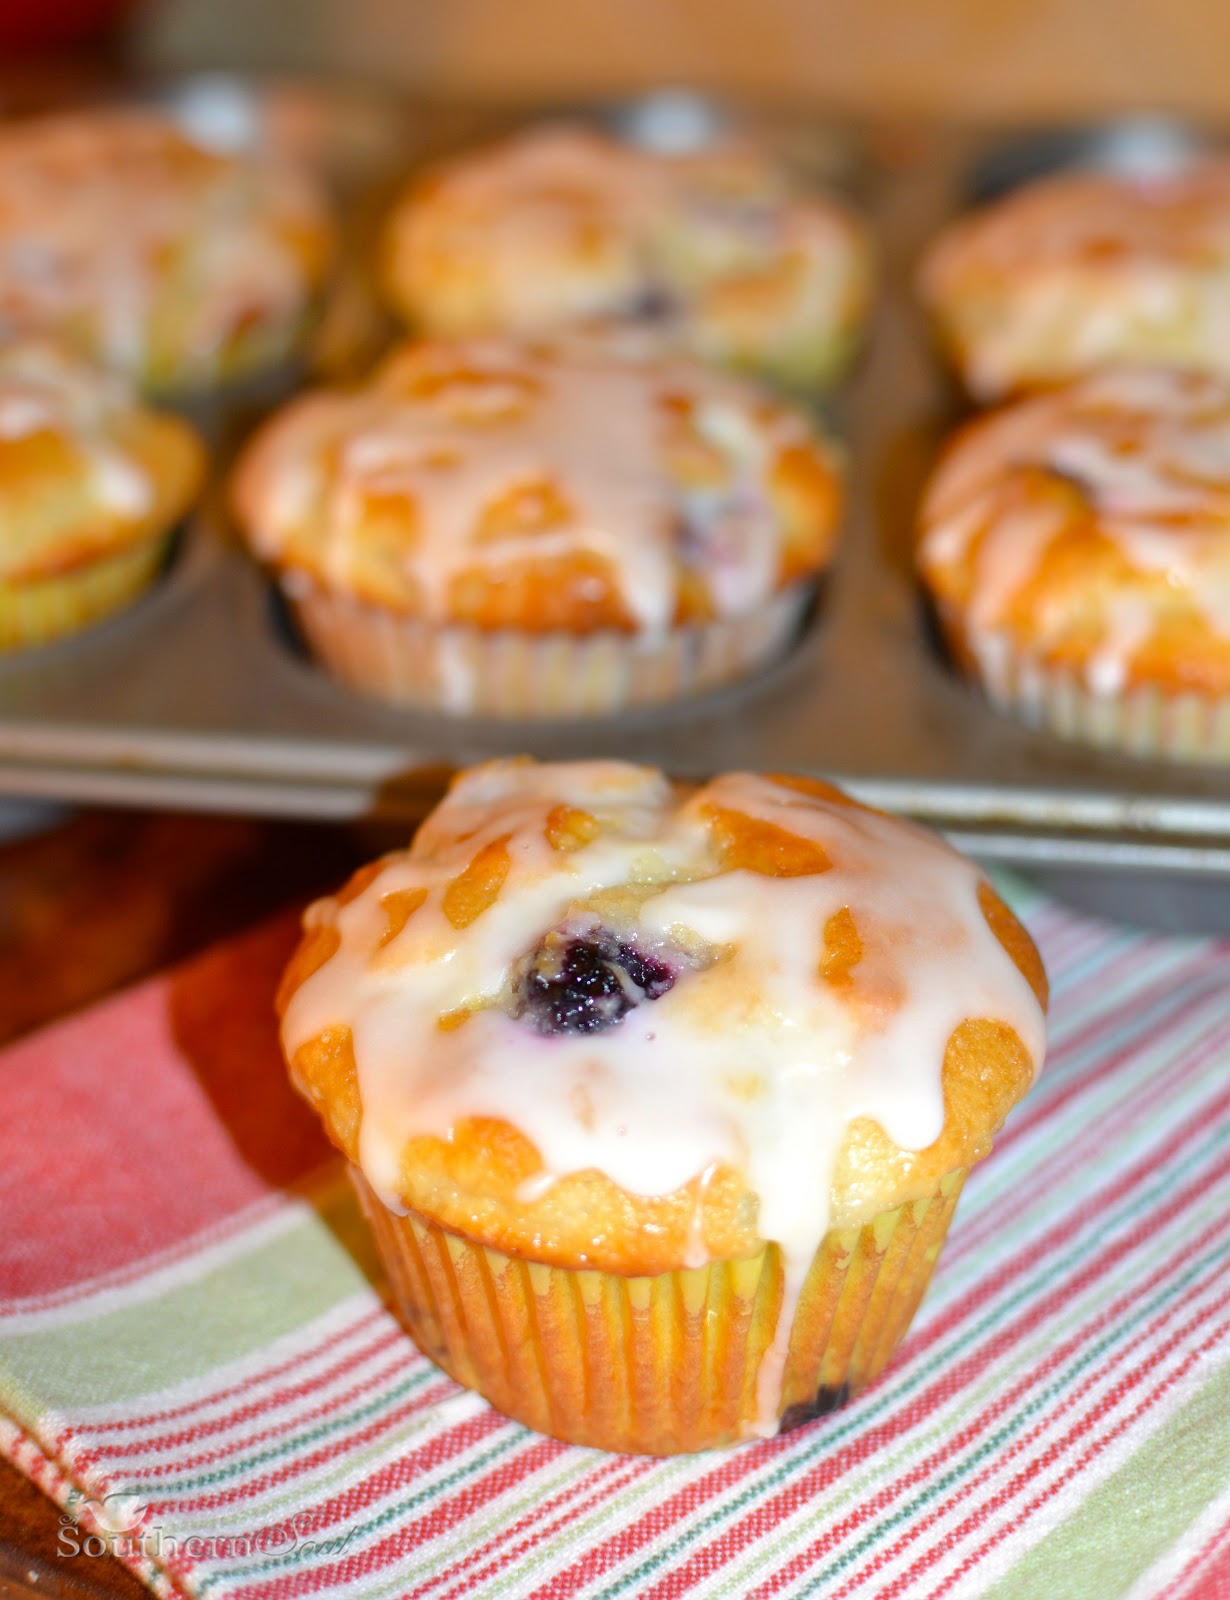 A Southern Soul: Blueberry Sour Cream Muffins with Lemon Glaze